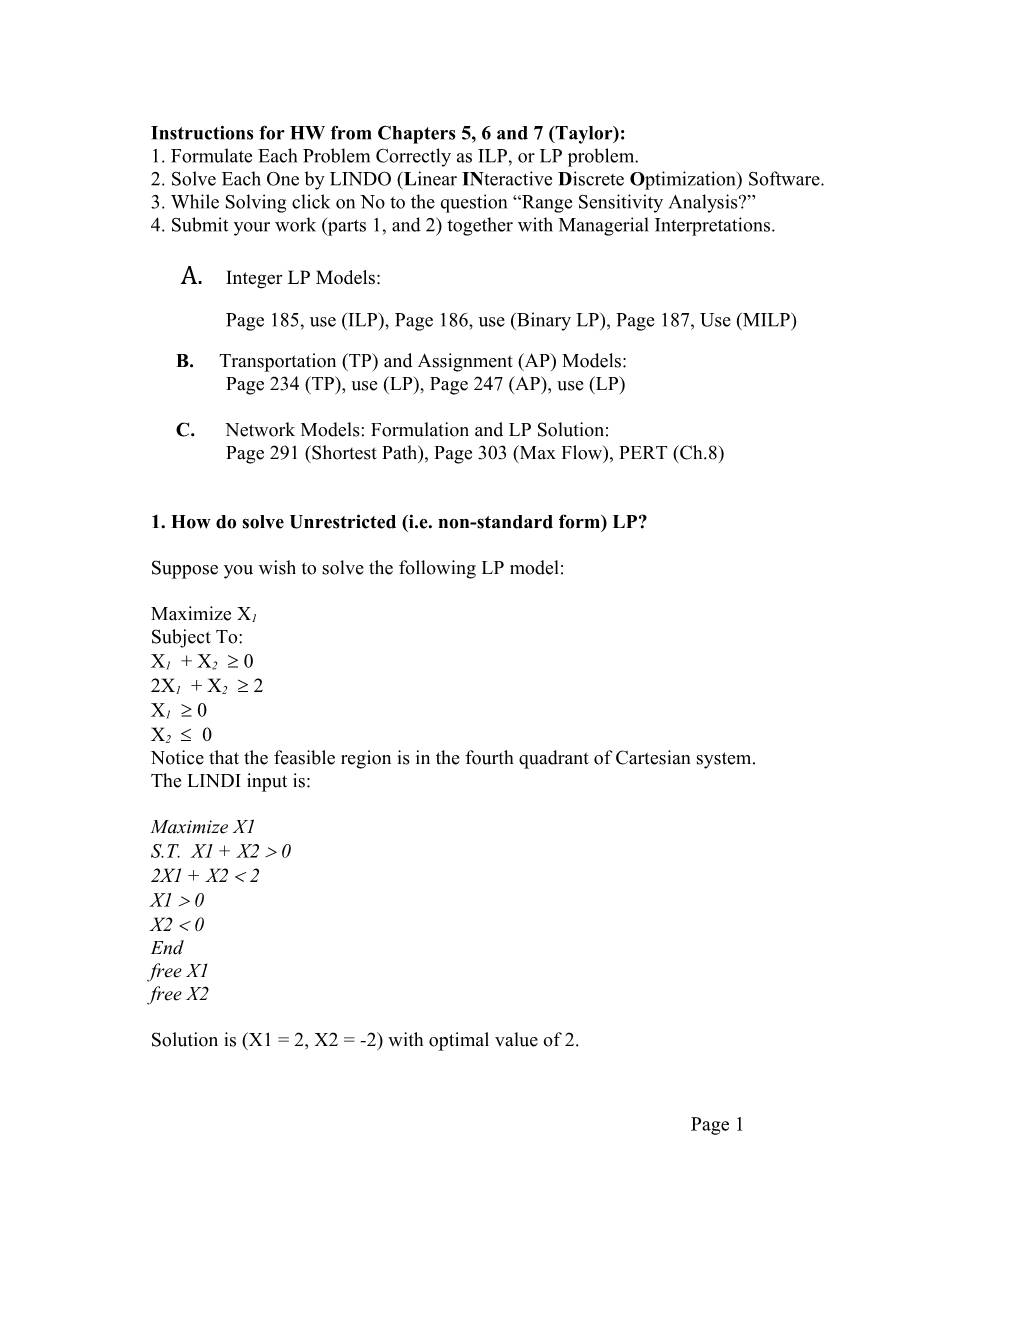 Instructions for HW from Chapters 5, 6 and 7 (Taylor)